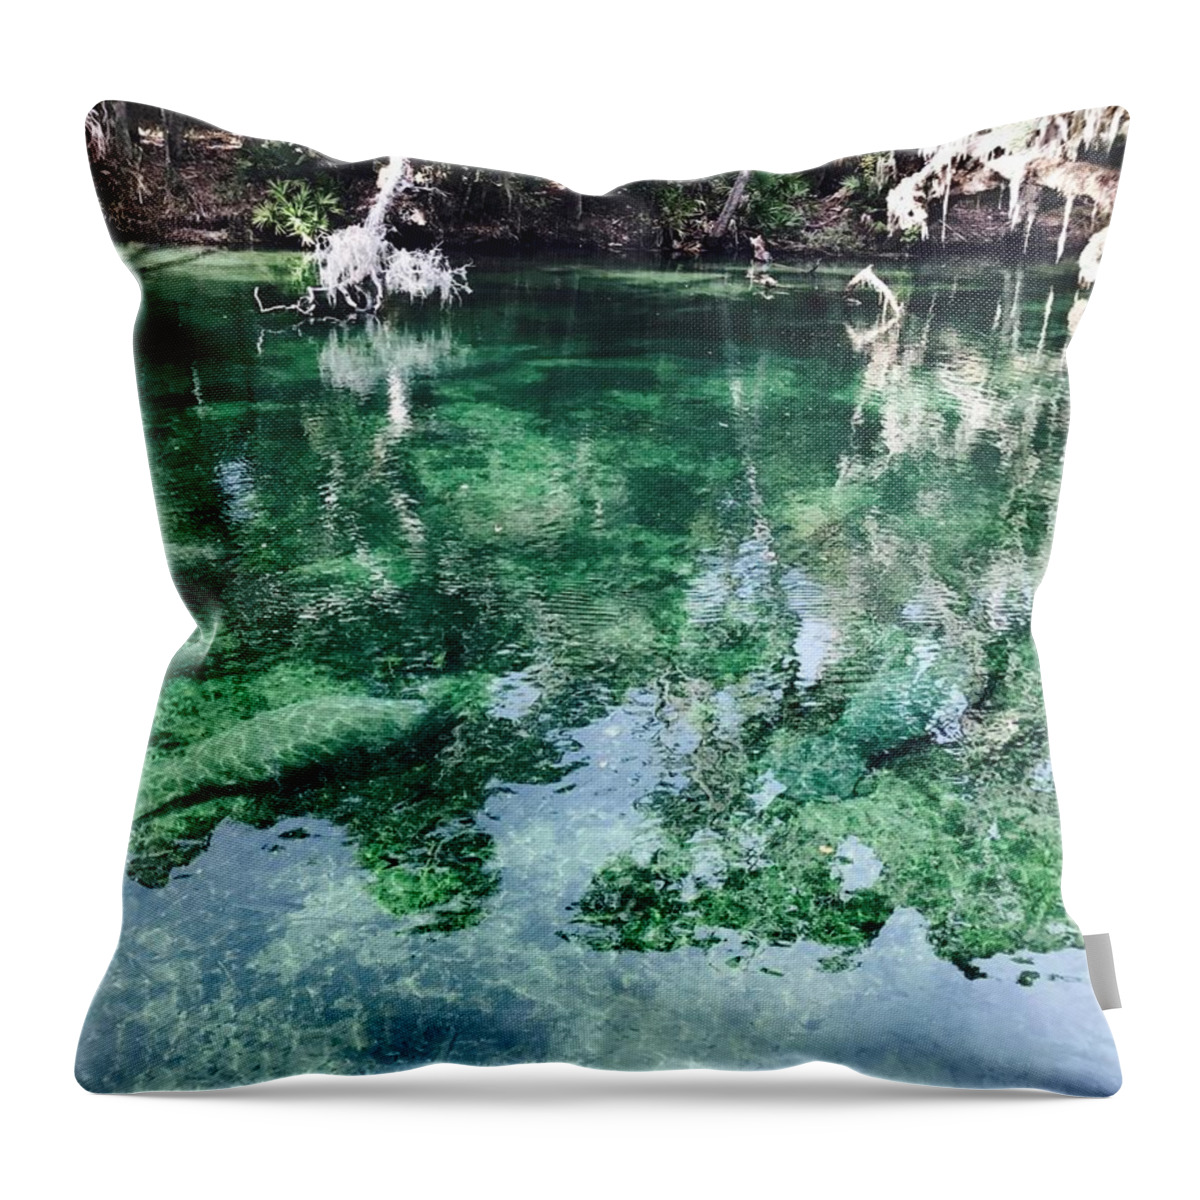 Manatees Throw Pillow featuring the photograph Manatees by Michael Albright